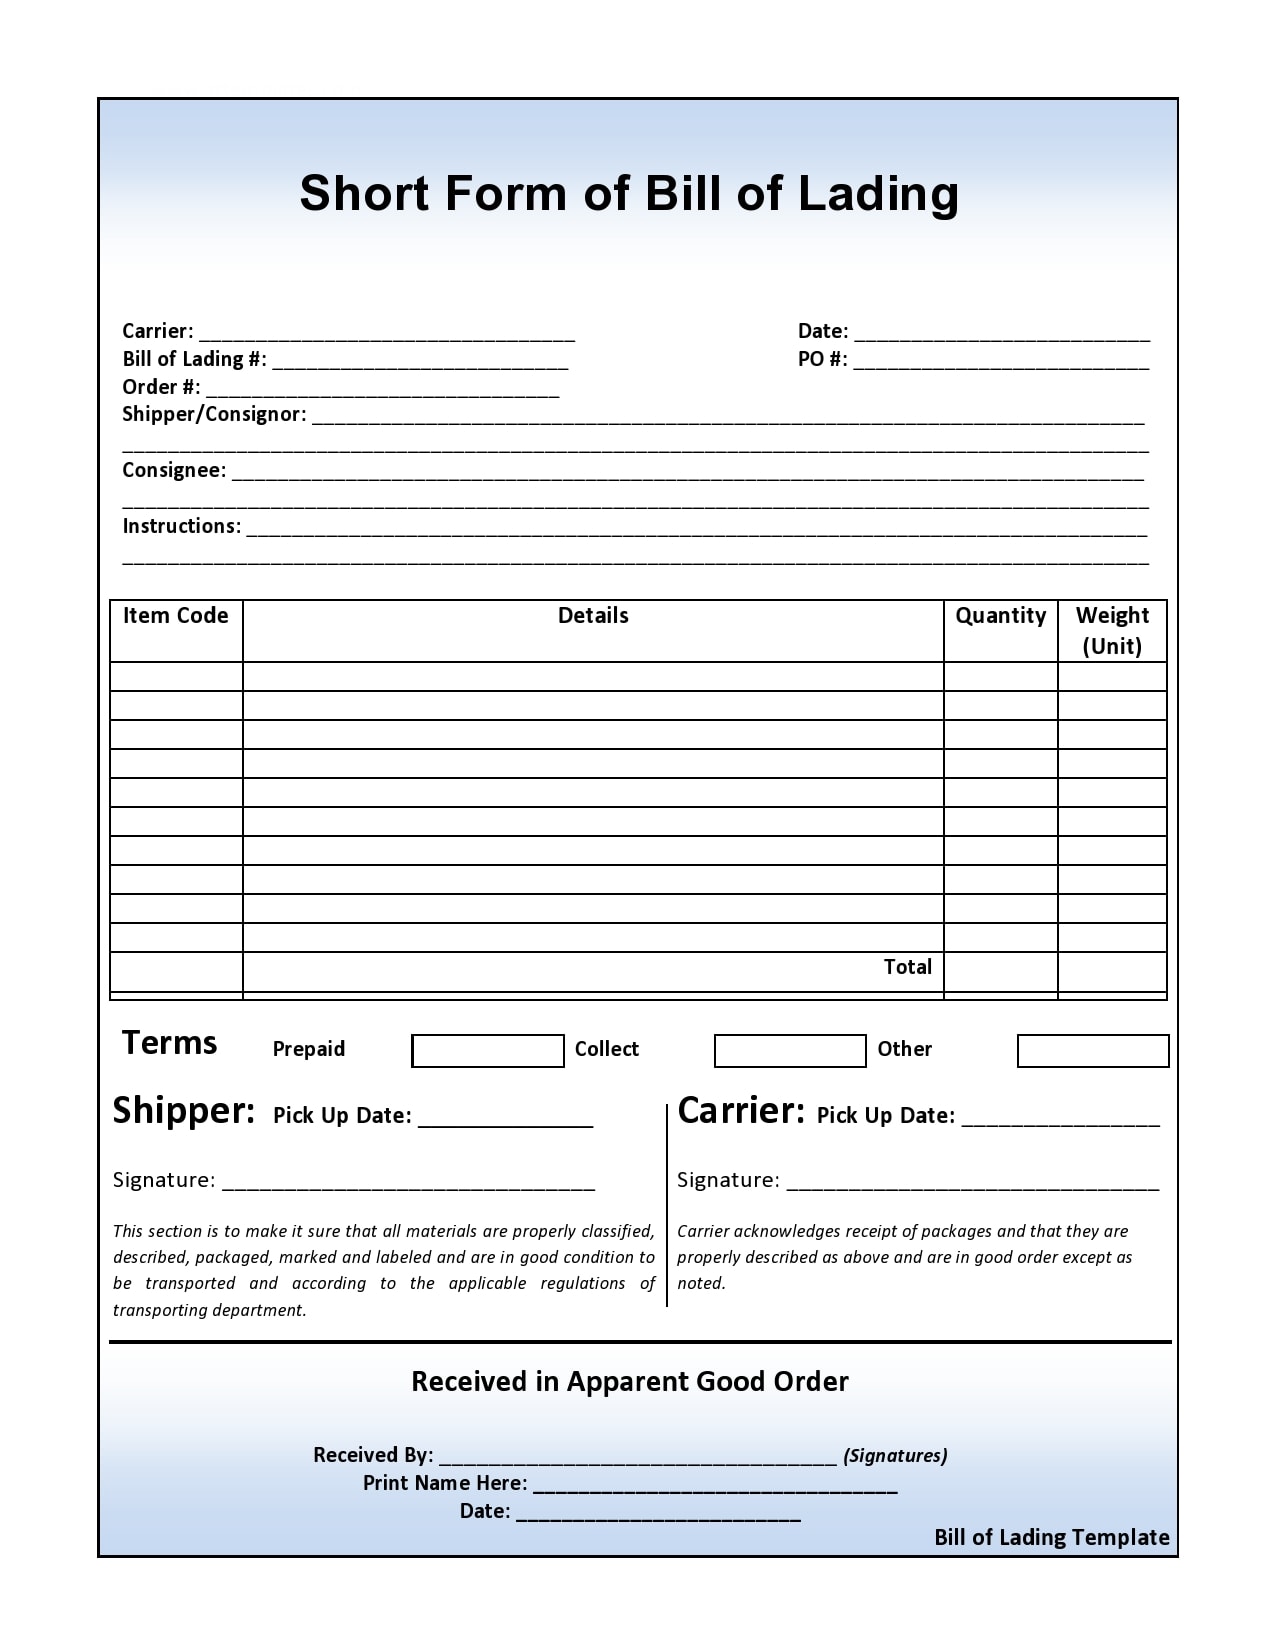 30 Blank Bill Of Lading Templates (100% FREE) TemplateArchive